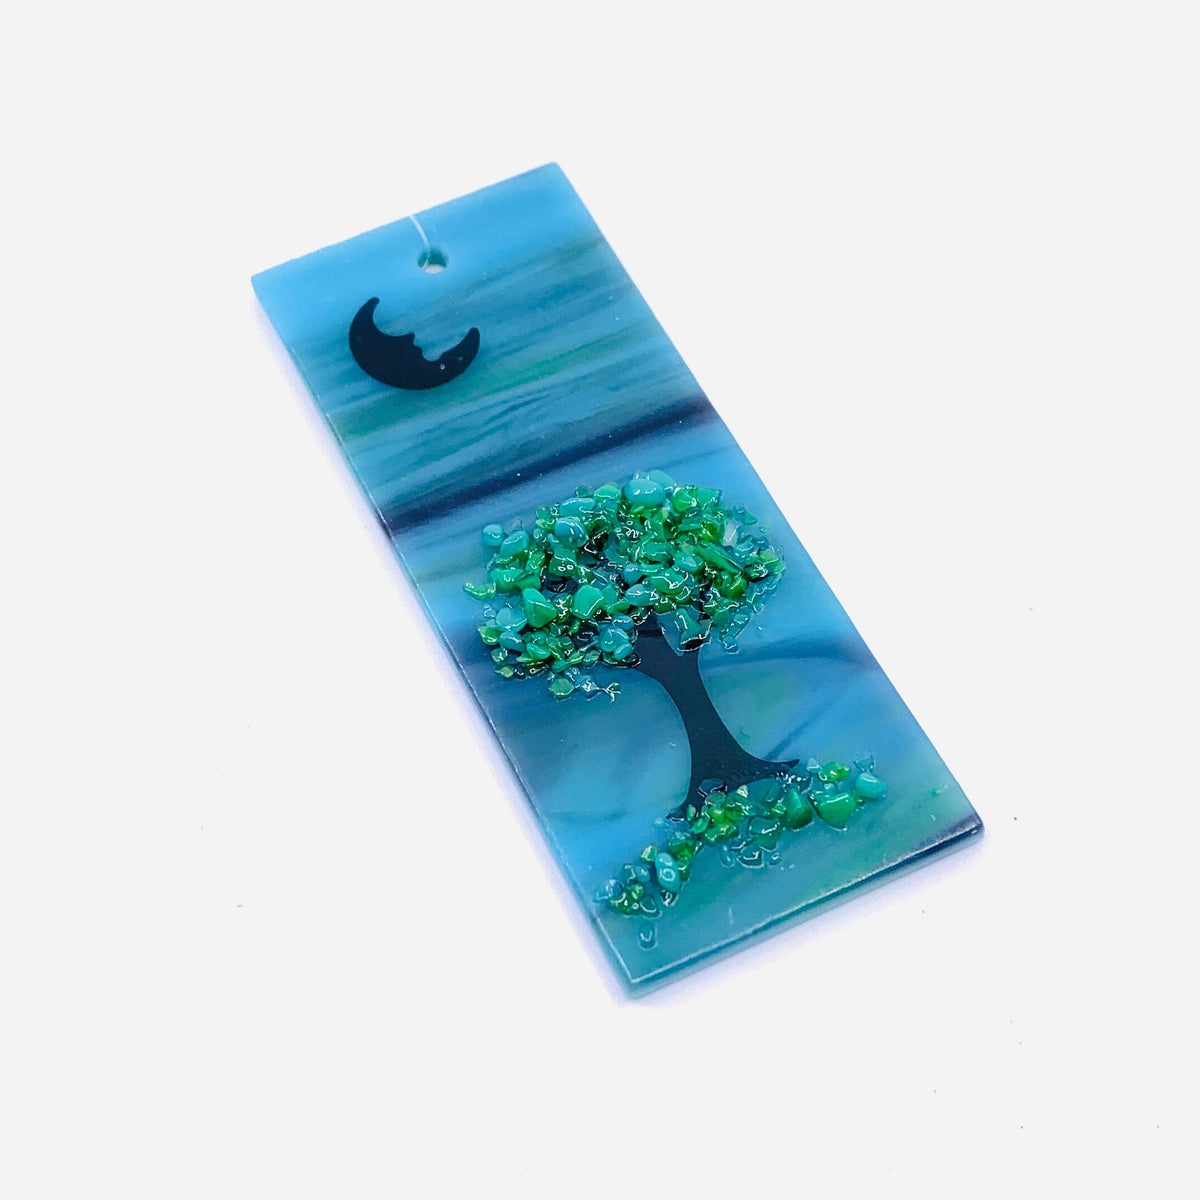 Fused Glass Tree of Life Suncatcher 1 Ornament Glimmer Glass Gifts 